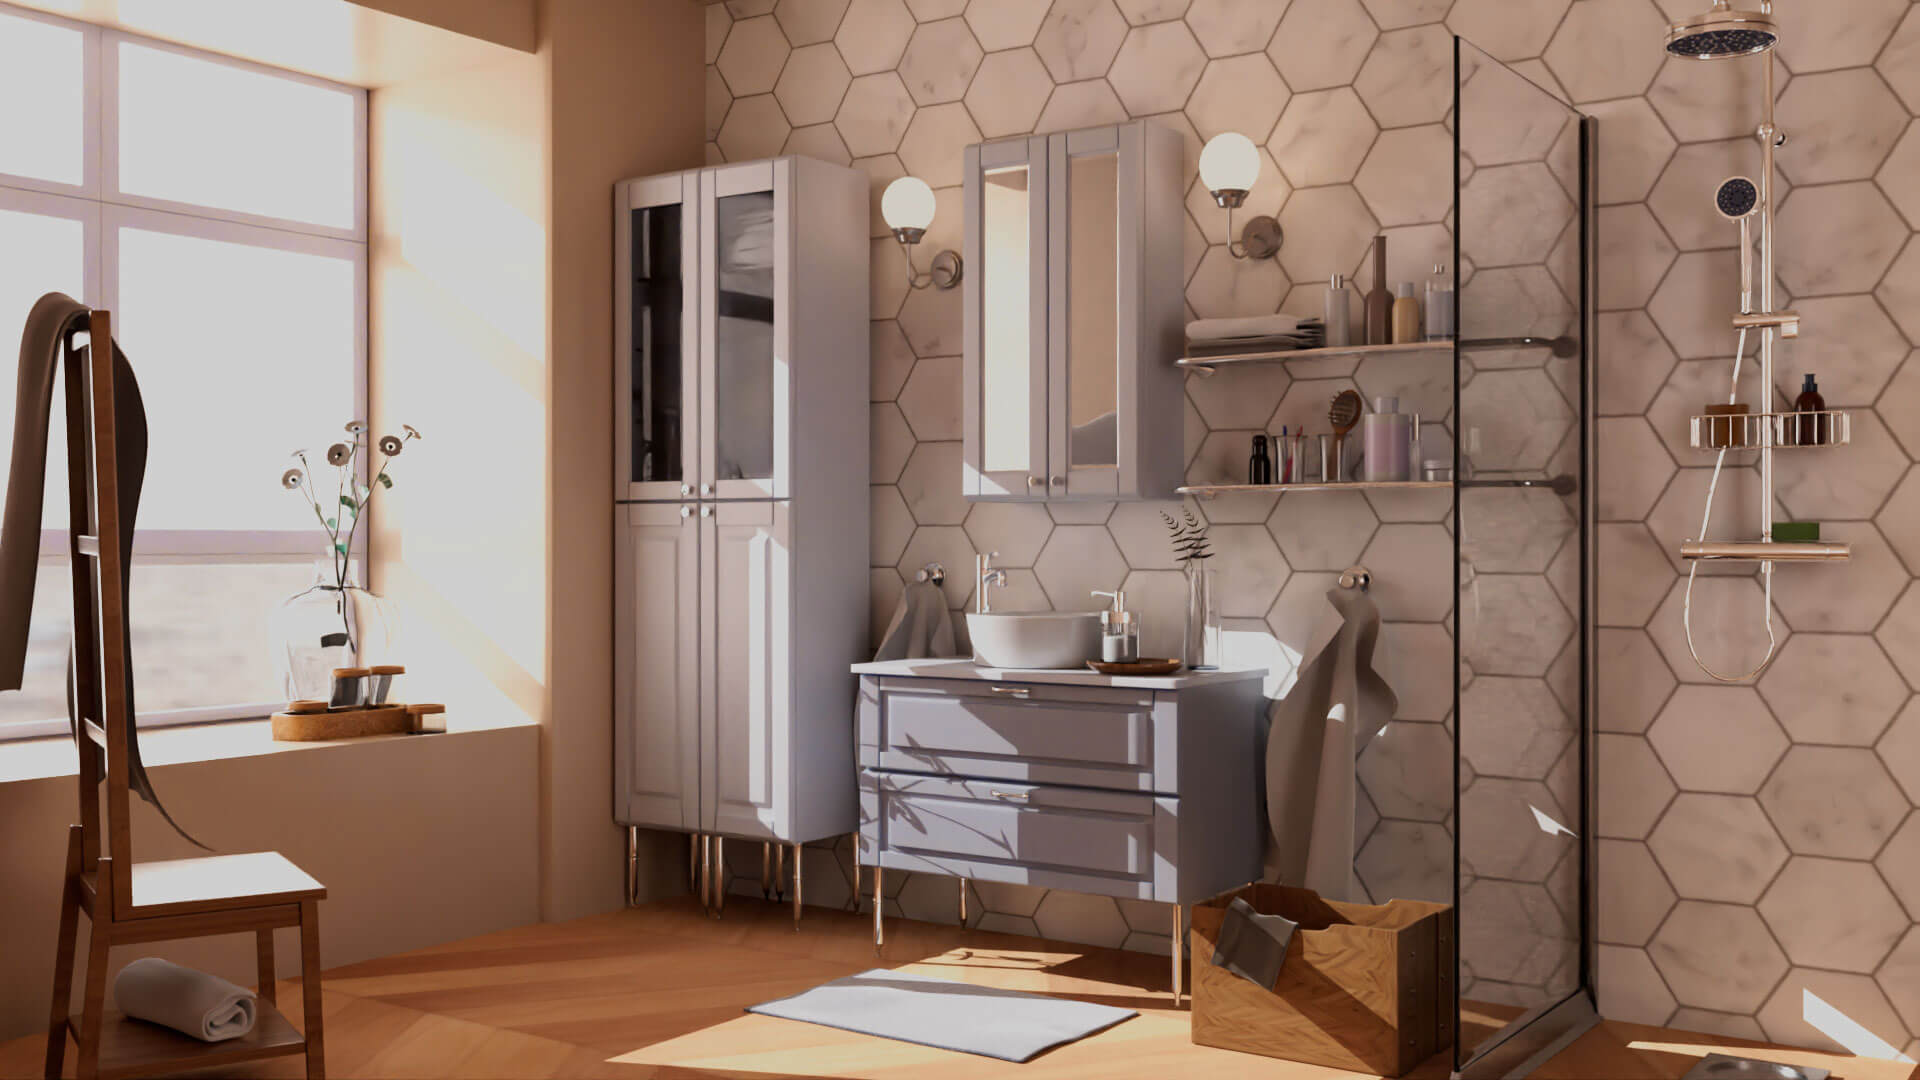 A look at a bathroom with a large window on the left and a shower on the right